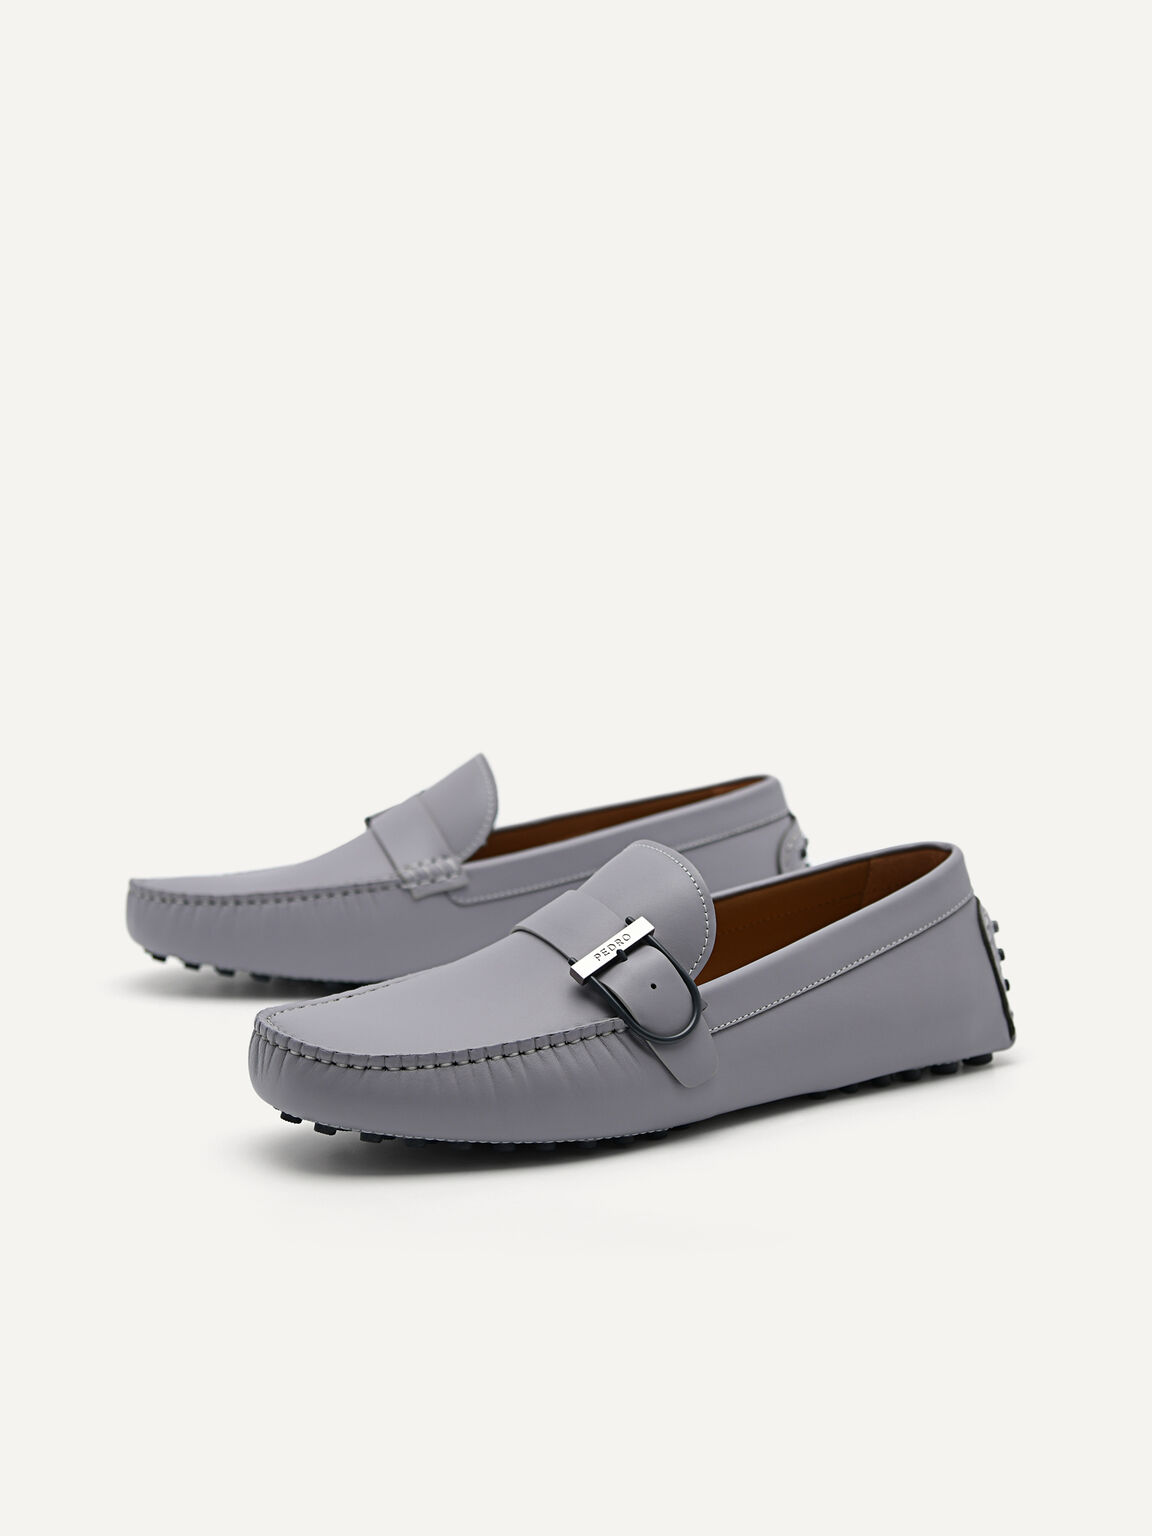 Leather Driving Moccassins with Adjustable Strap, Grey